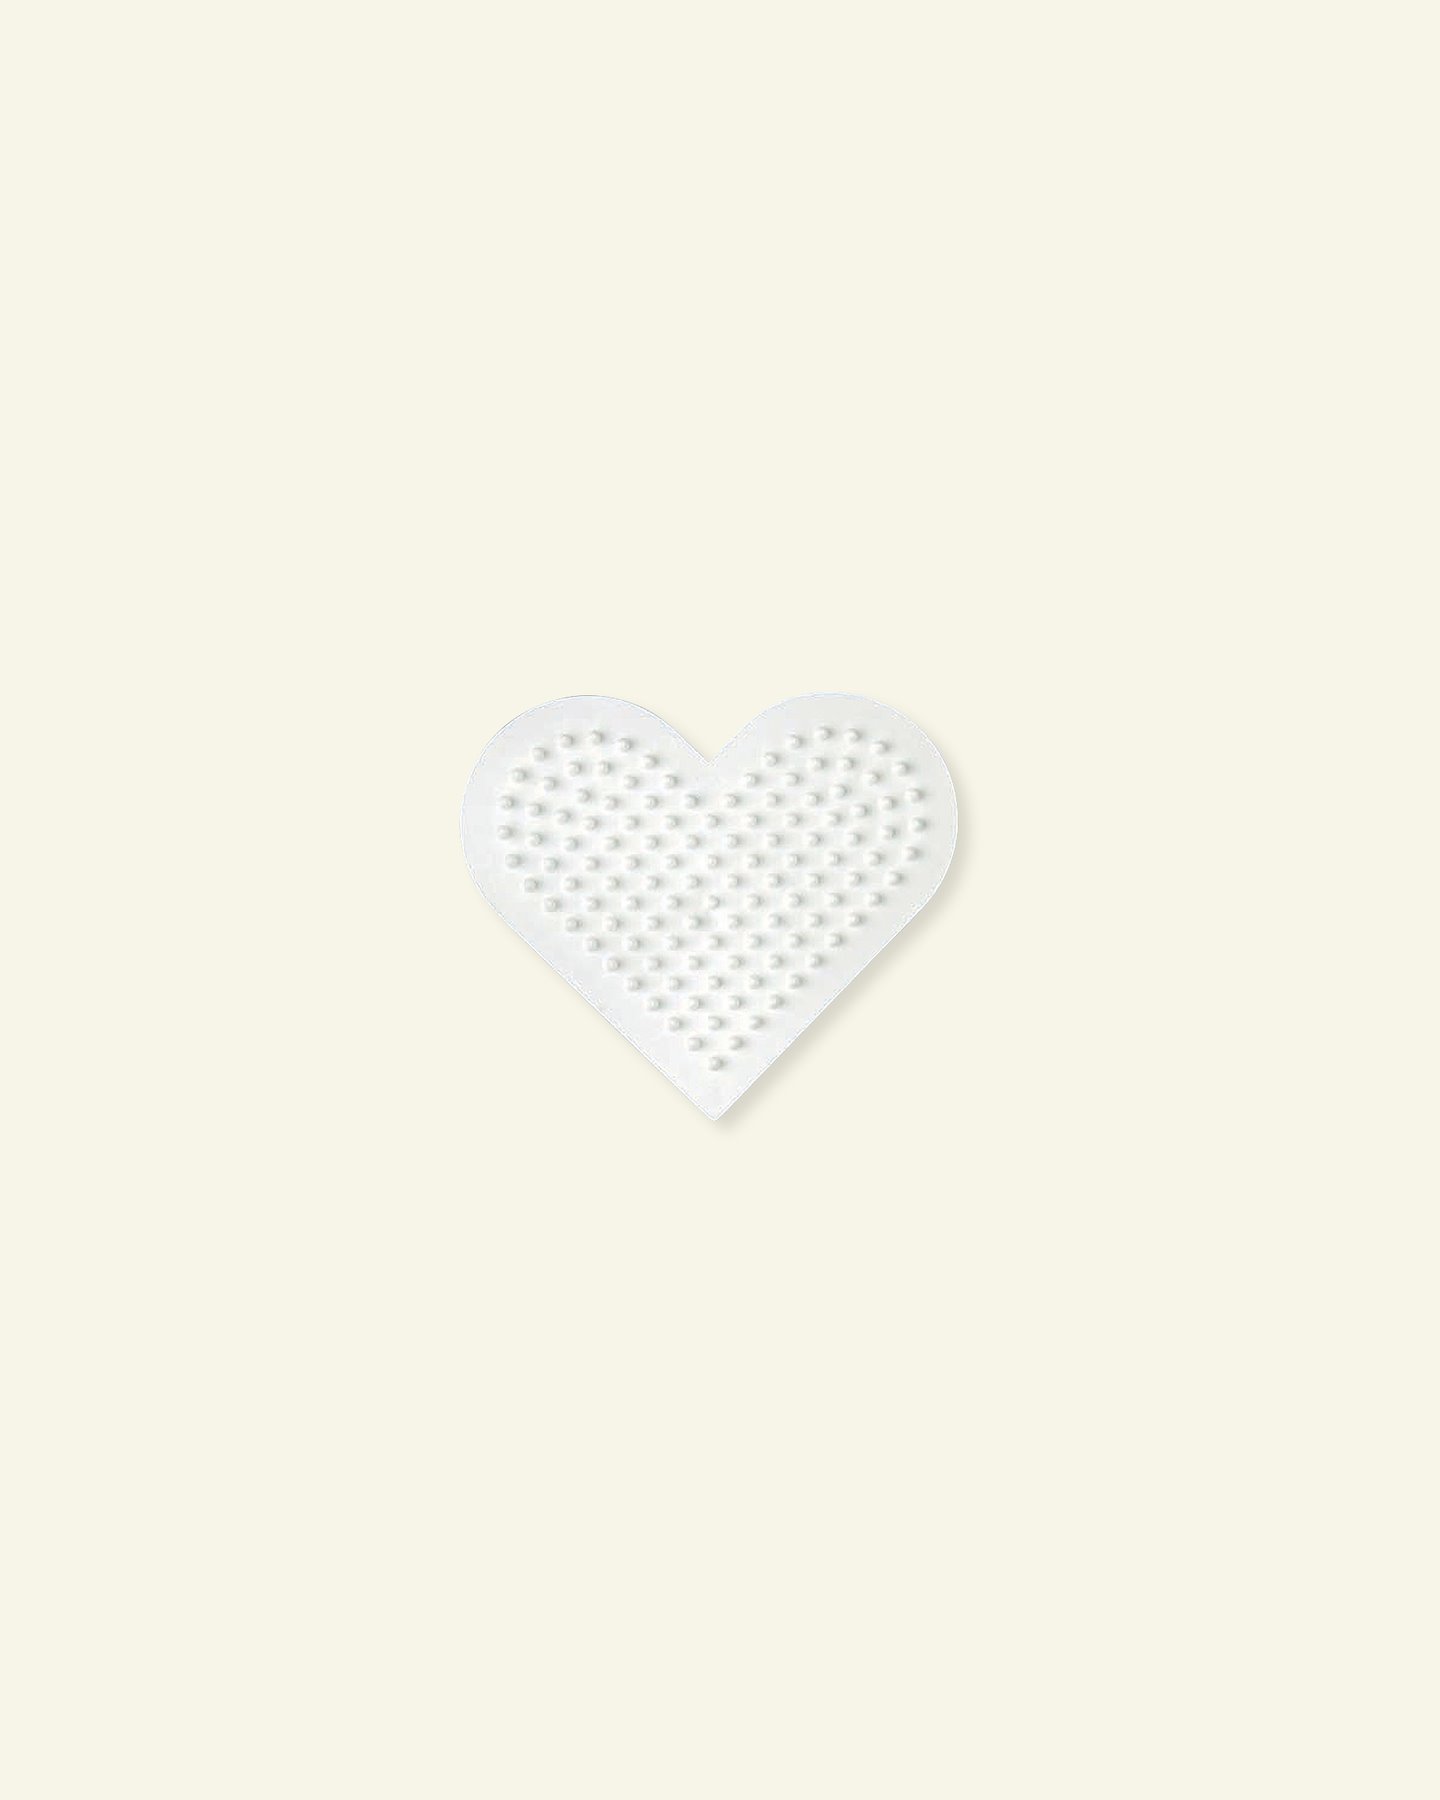 Hama pegboard heart small 8,5x7,5cm 28469_pack